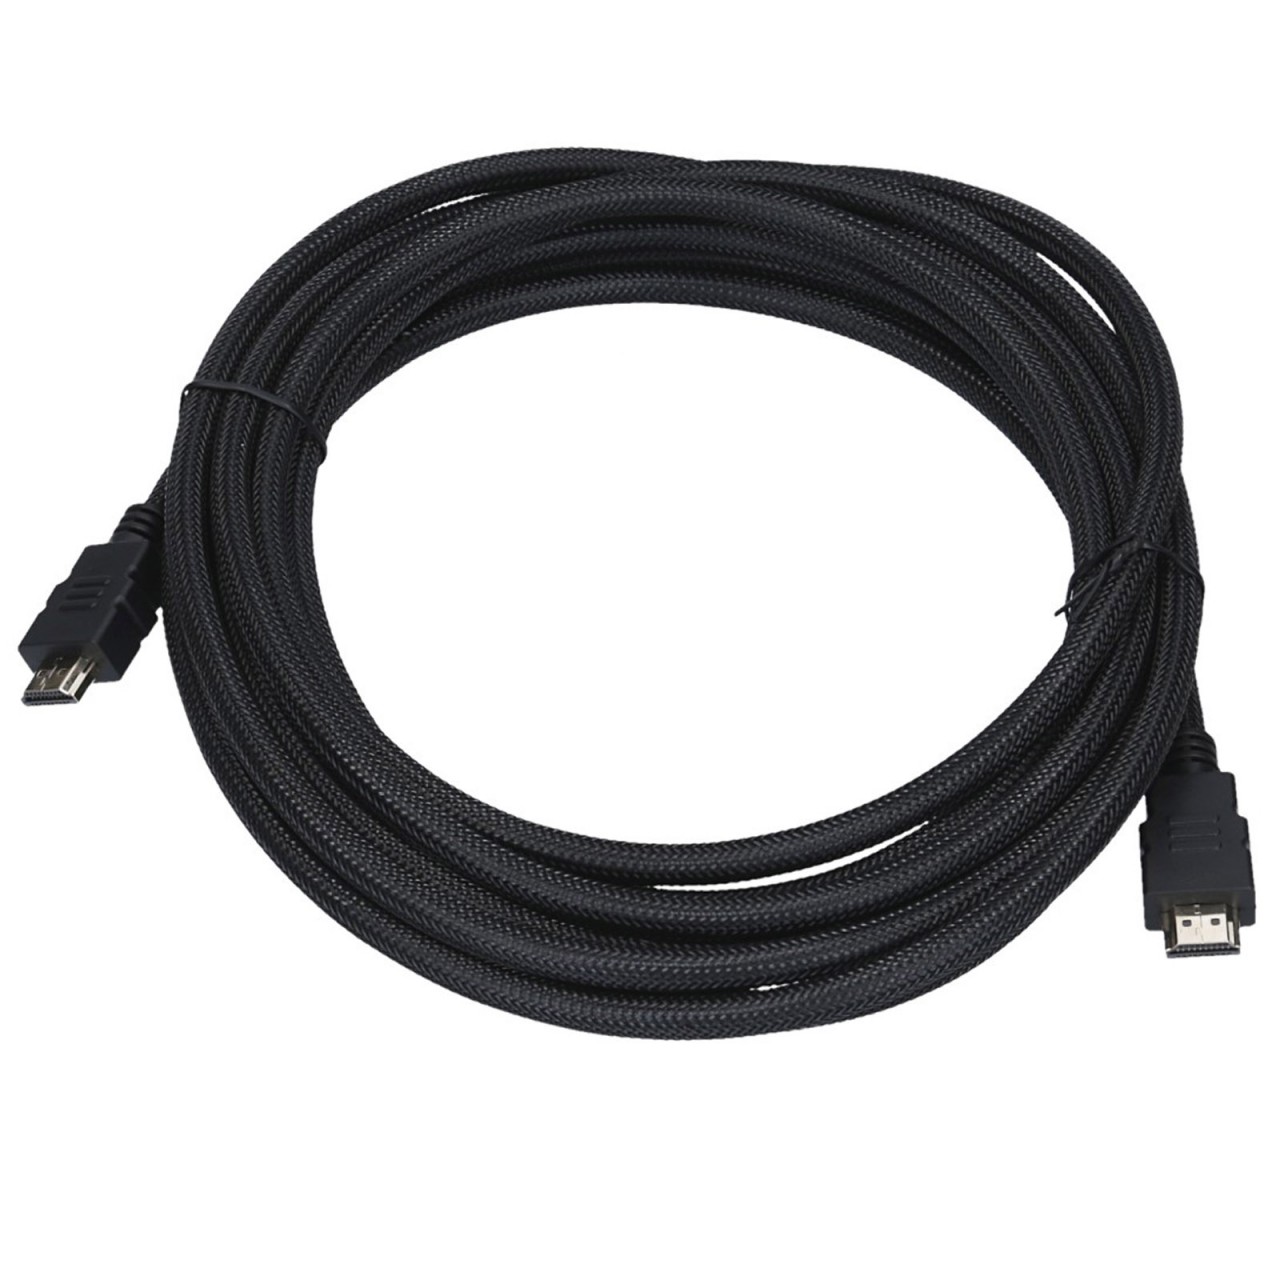 2 m HDMI cable High Speed with Ethernet, HDMI 2.0 4K